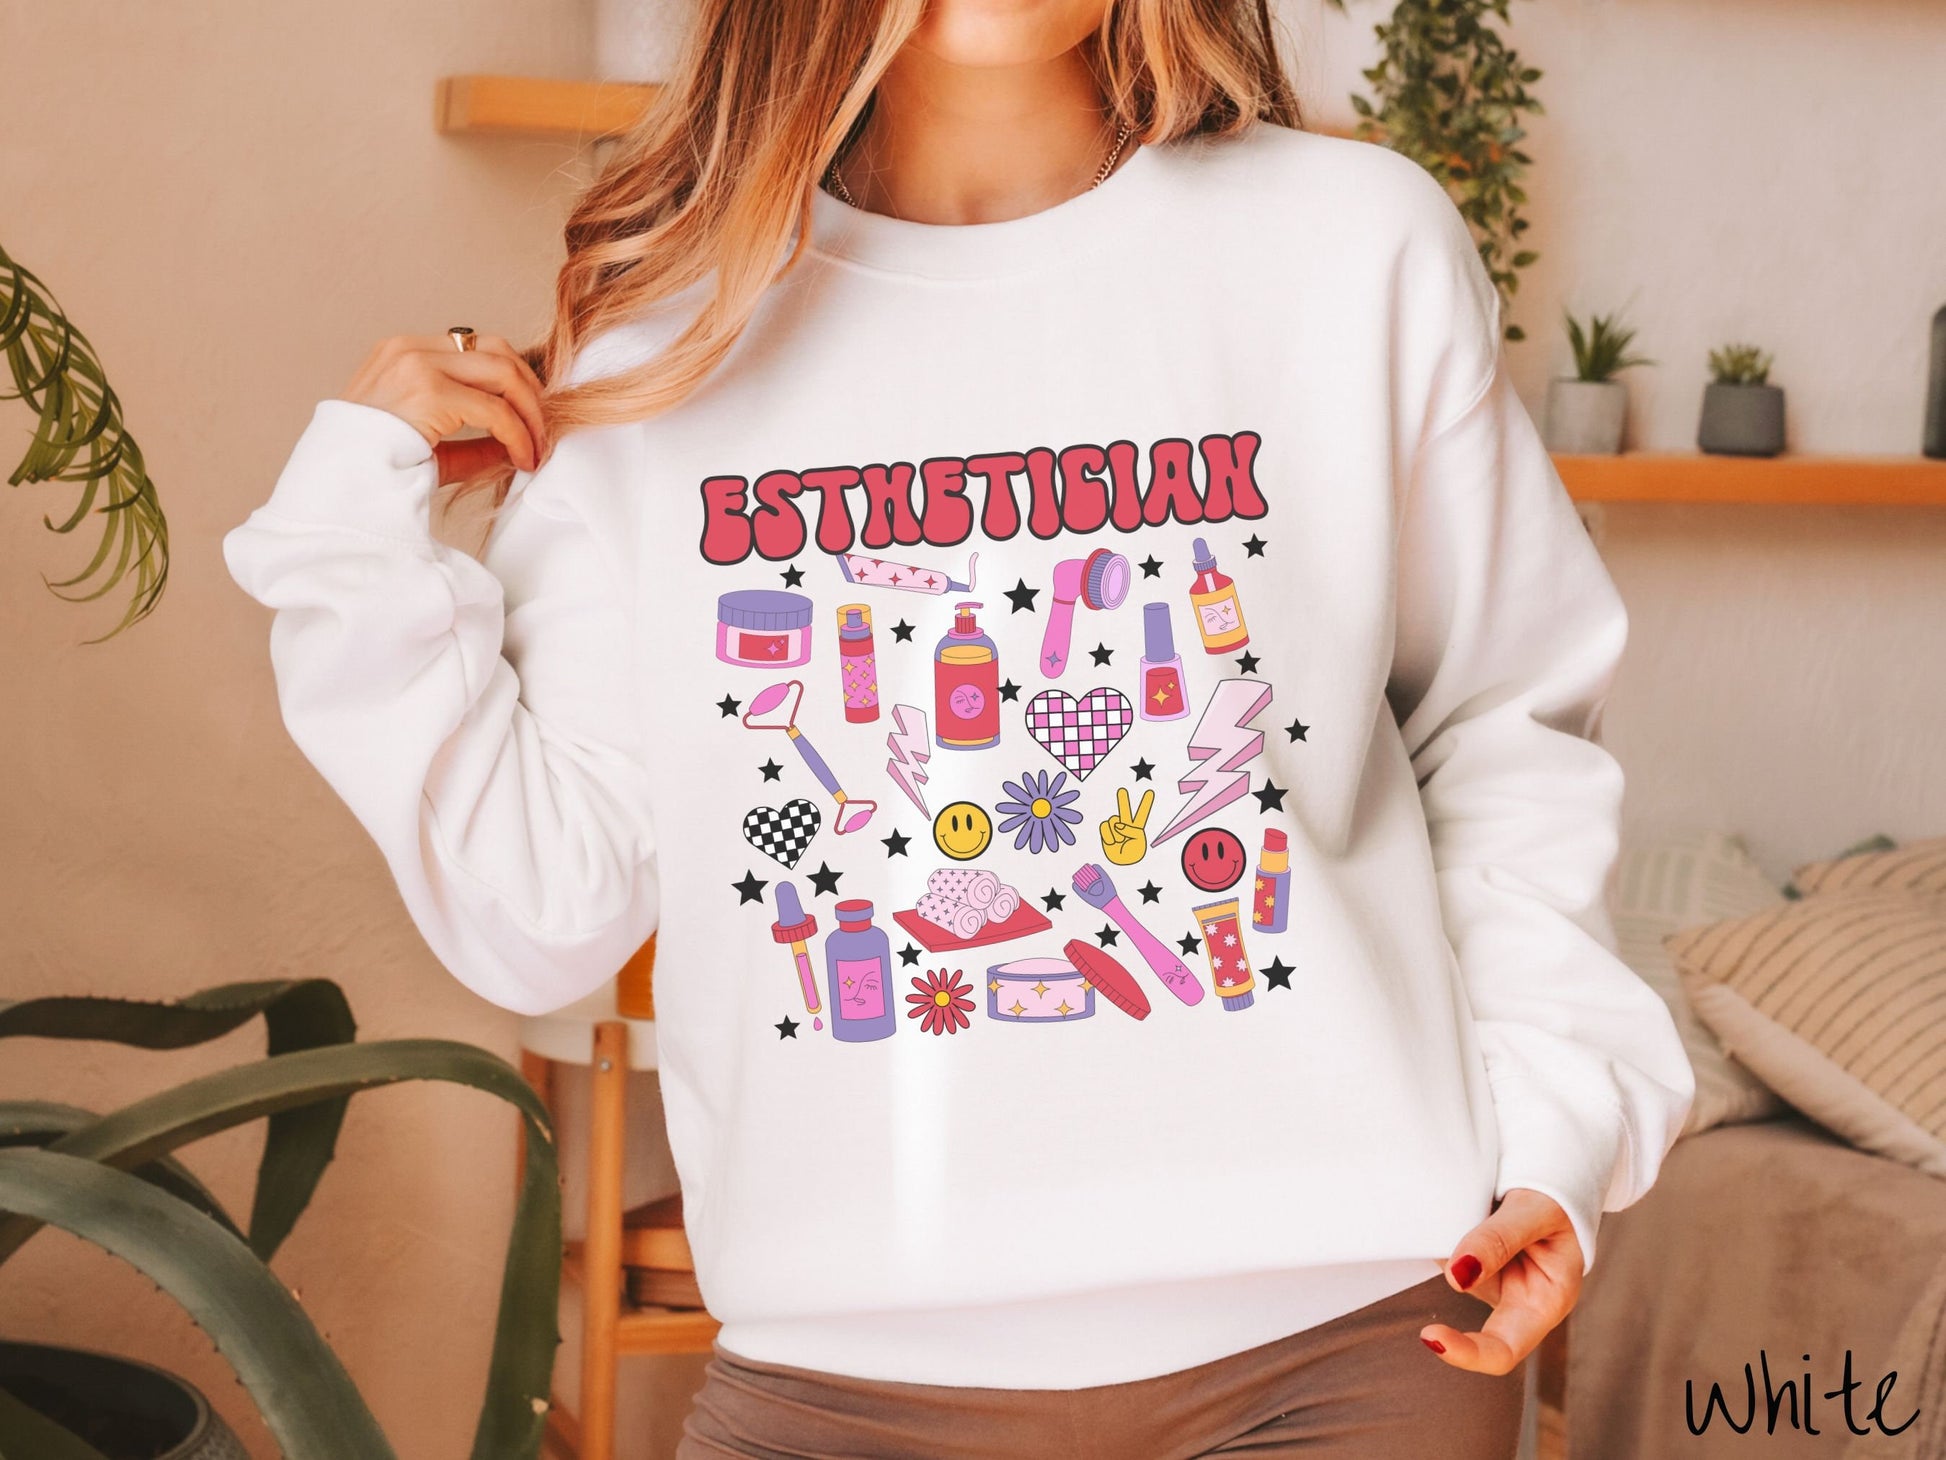 A woman wearing a cute white colored sweatshirt with the word Esthetician across the top and hair care items below like cream, rollers, hair care products, and droppers. Smiley faces, stars, and lightning bolts are spread out among the items.